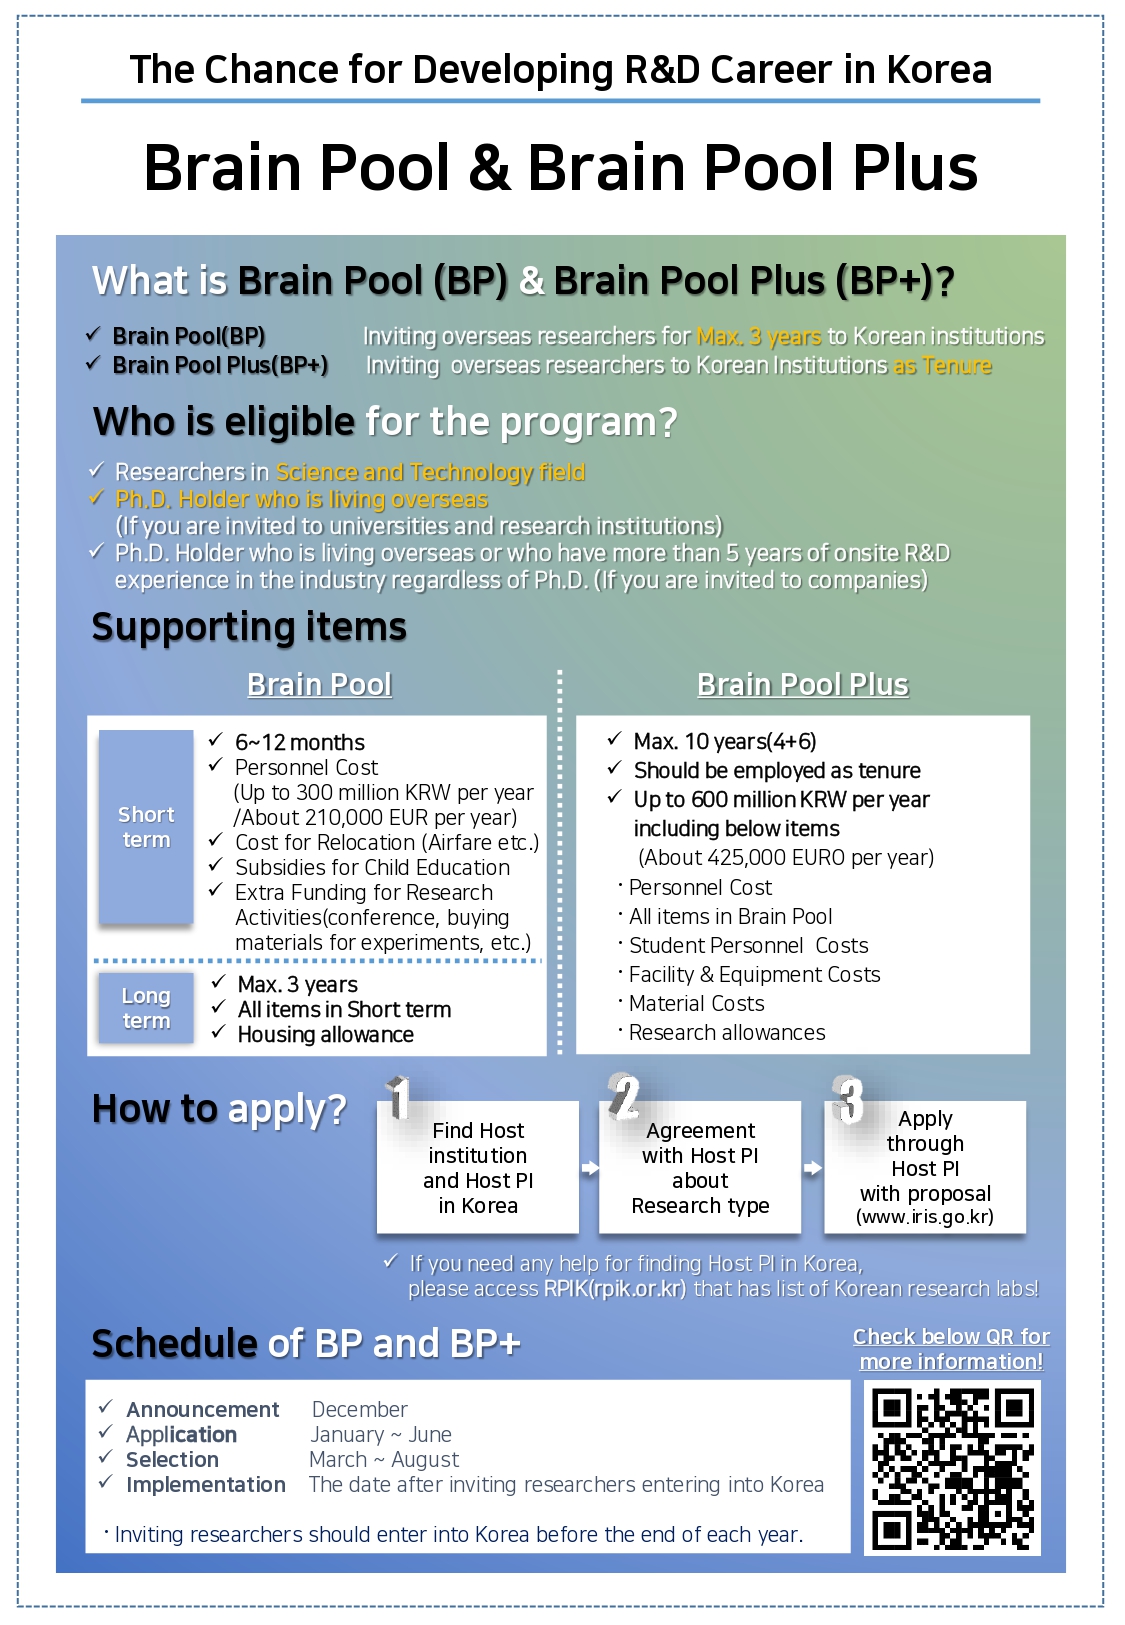 Brain Pool One Page Flyer_page-0001.jpg